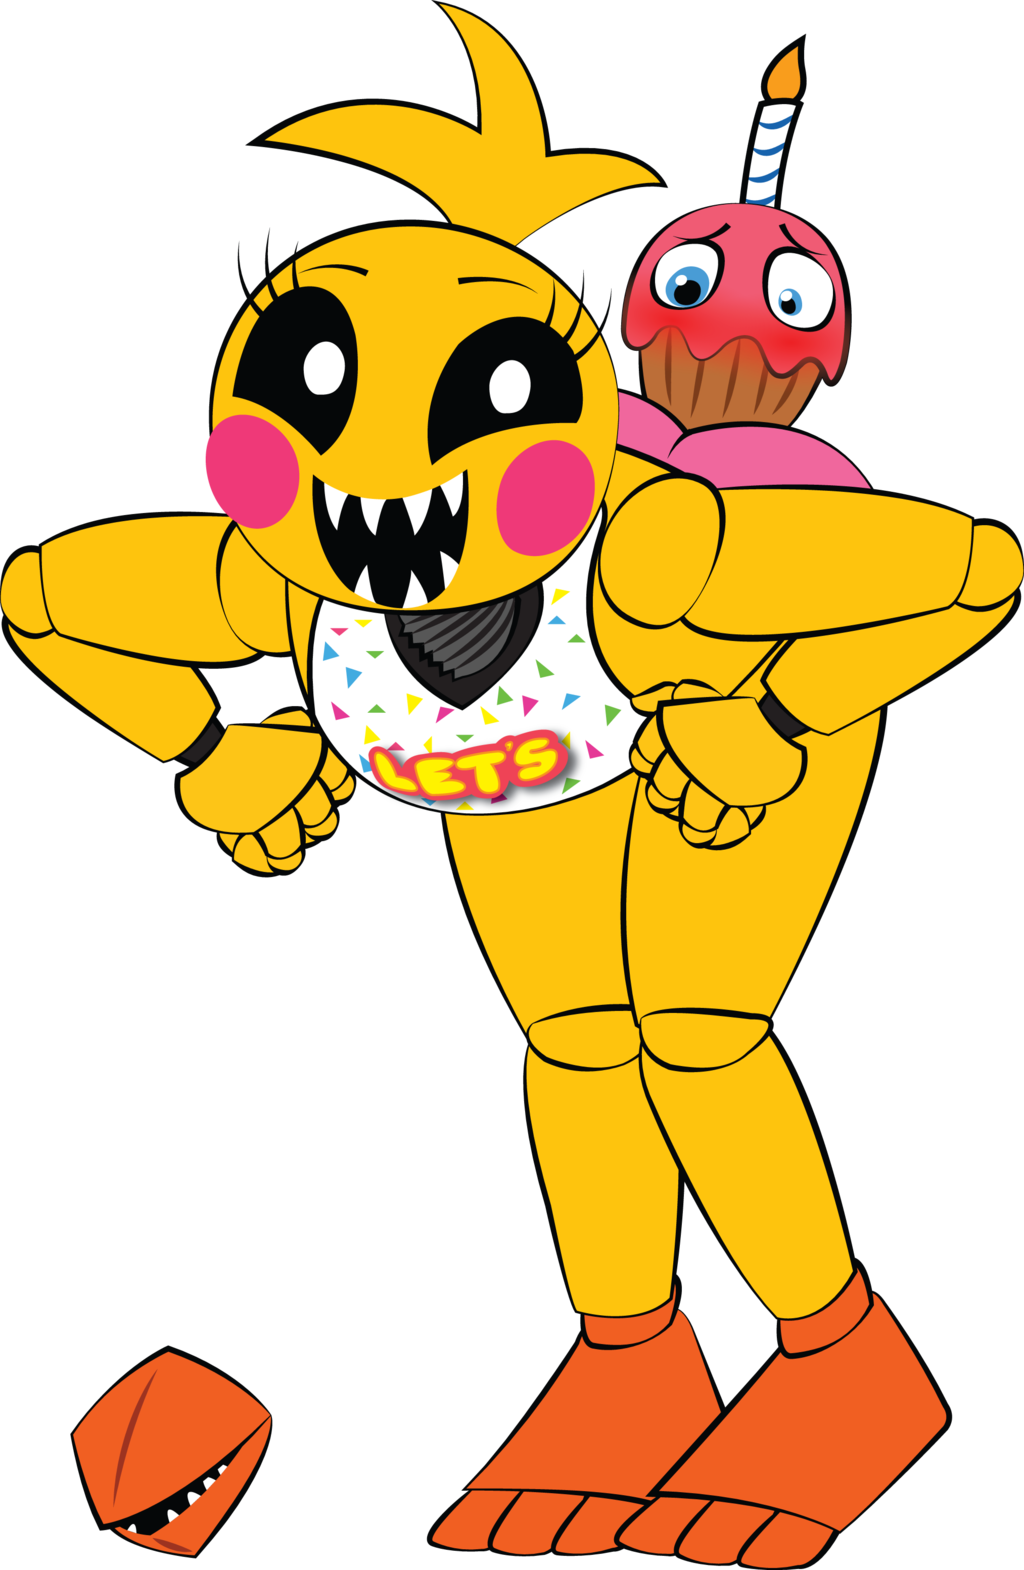 Five Nights At Freddy's 2 Five Nights At Freddy's 3 - Fnaf Toy Chica Booty (1024x1570)